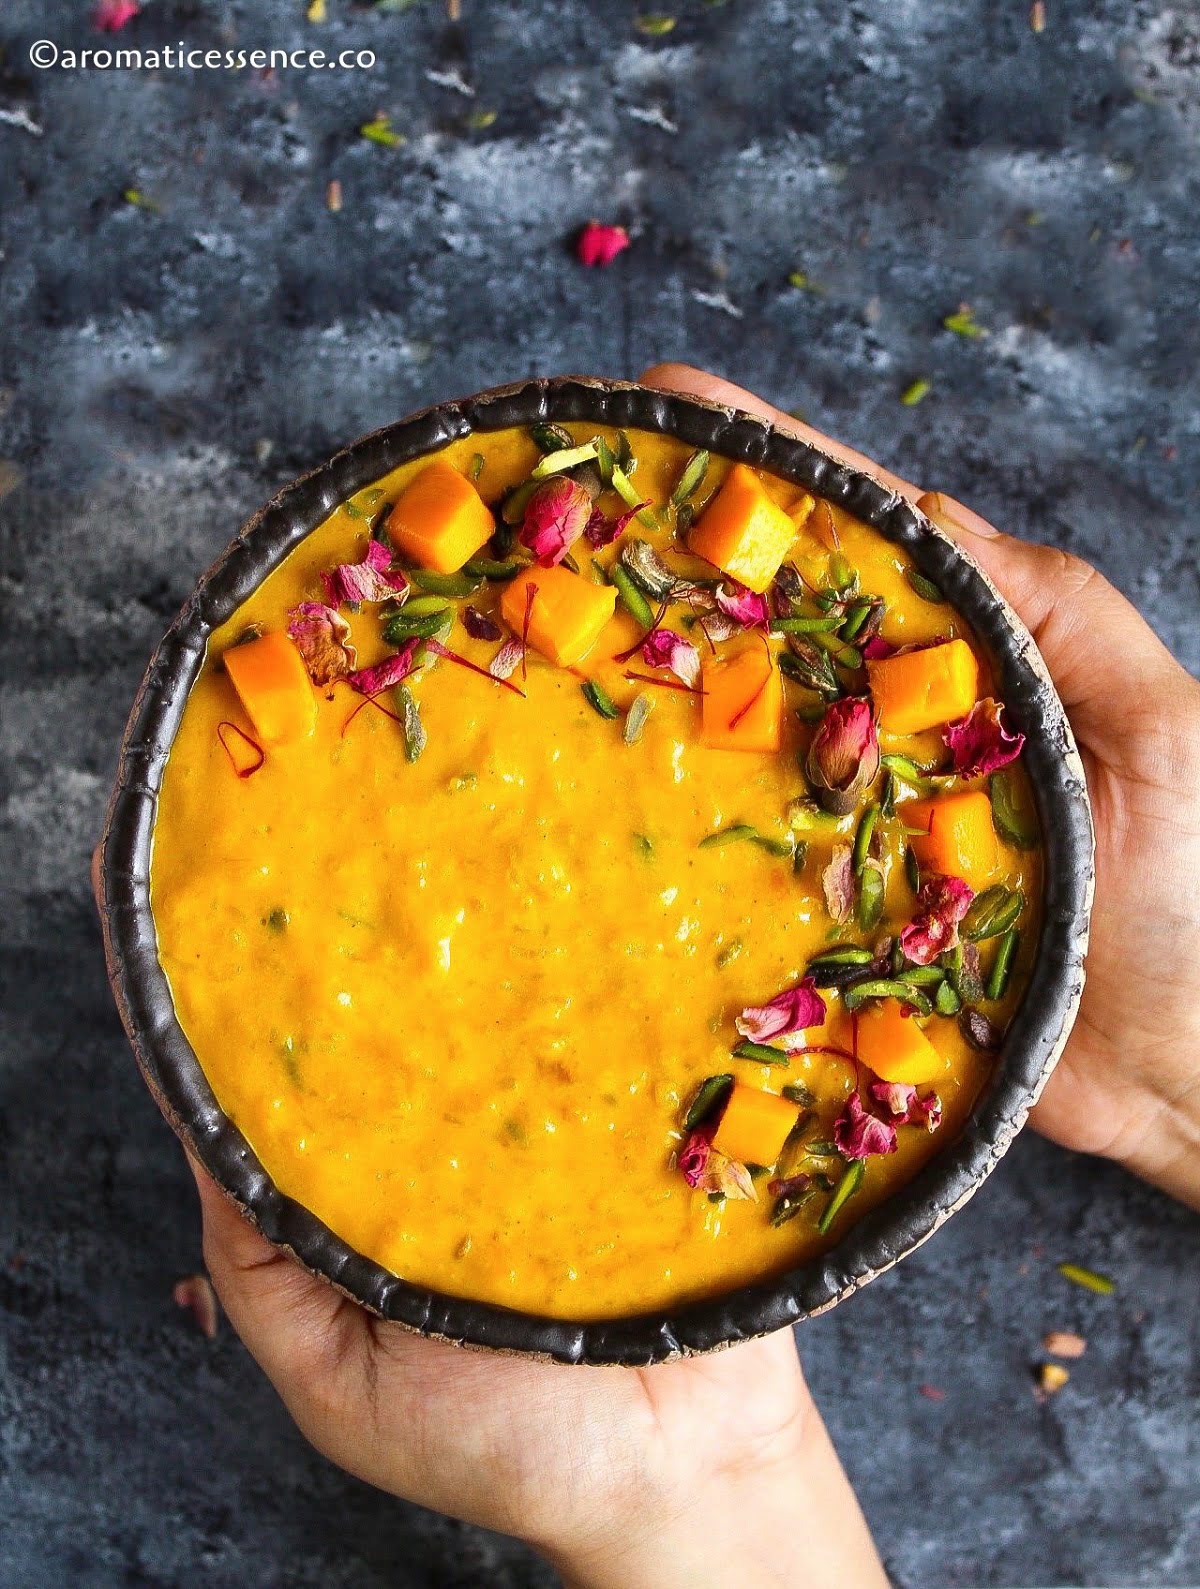 Hands holding a bowl of mango rice kheer against a dark background